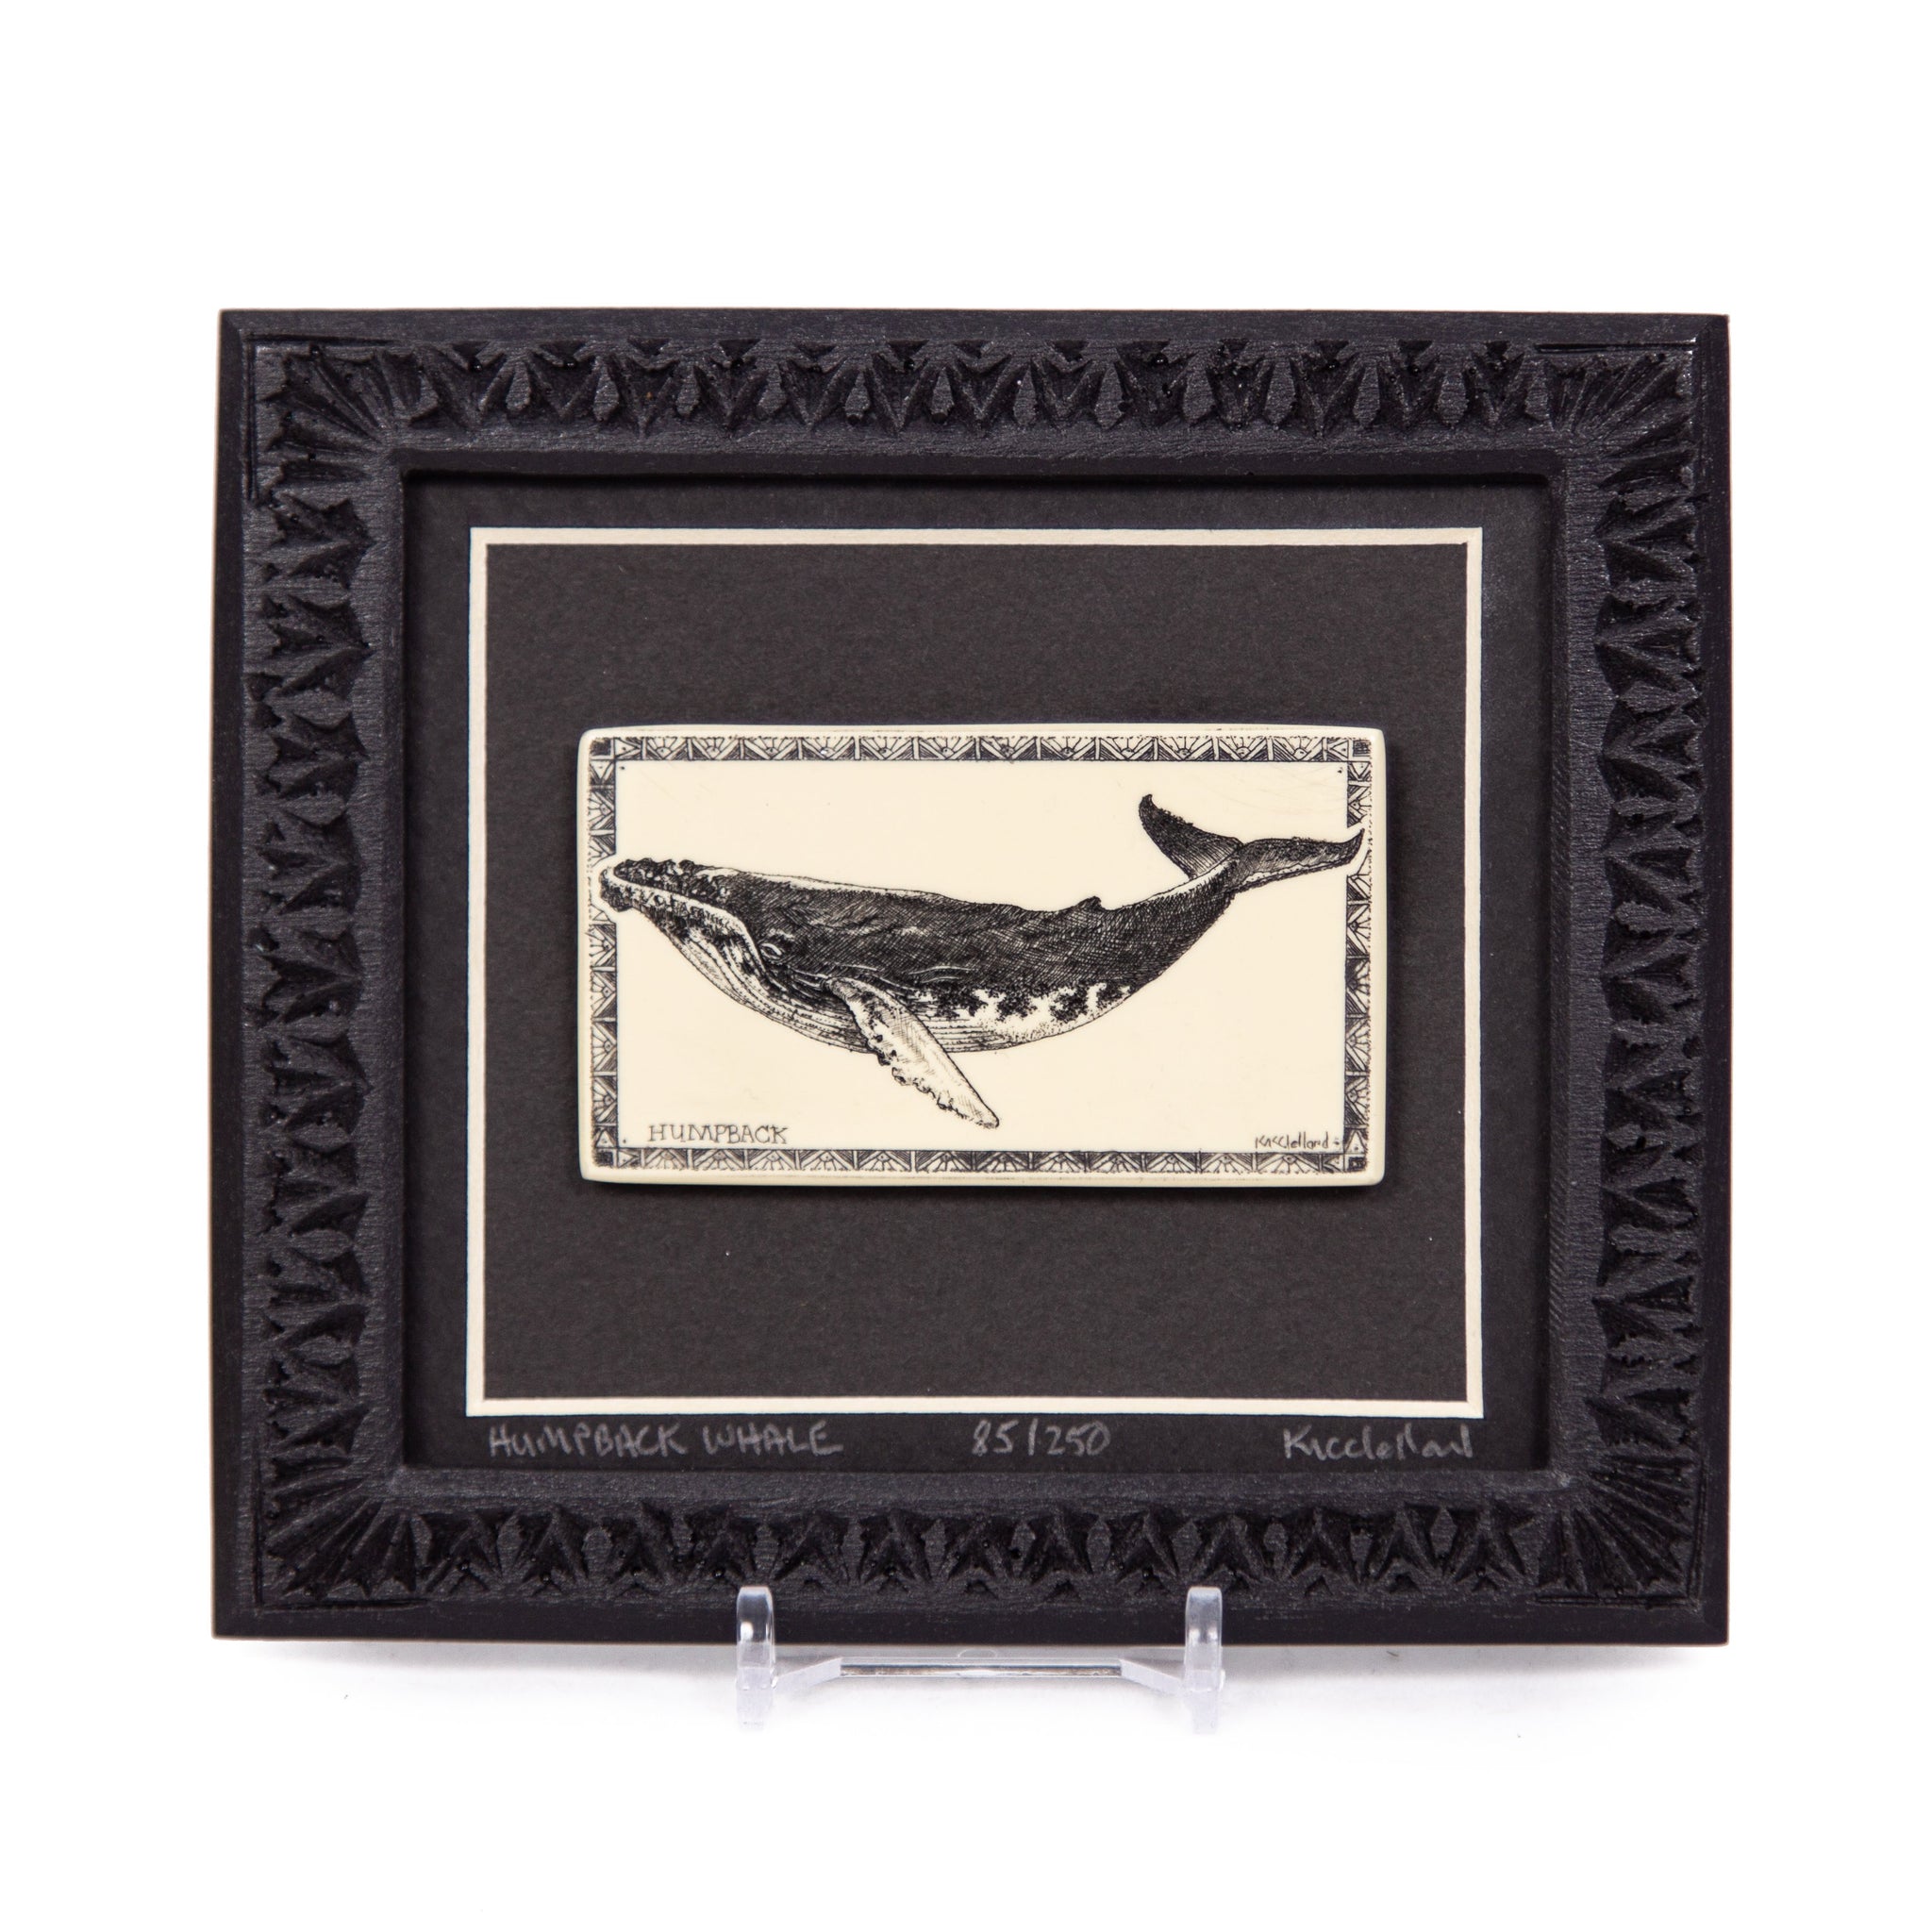 "Humpback Whale" Large Chip Carved Frame